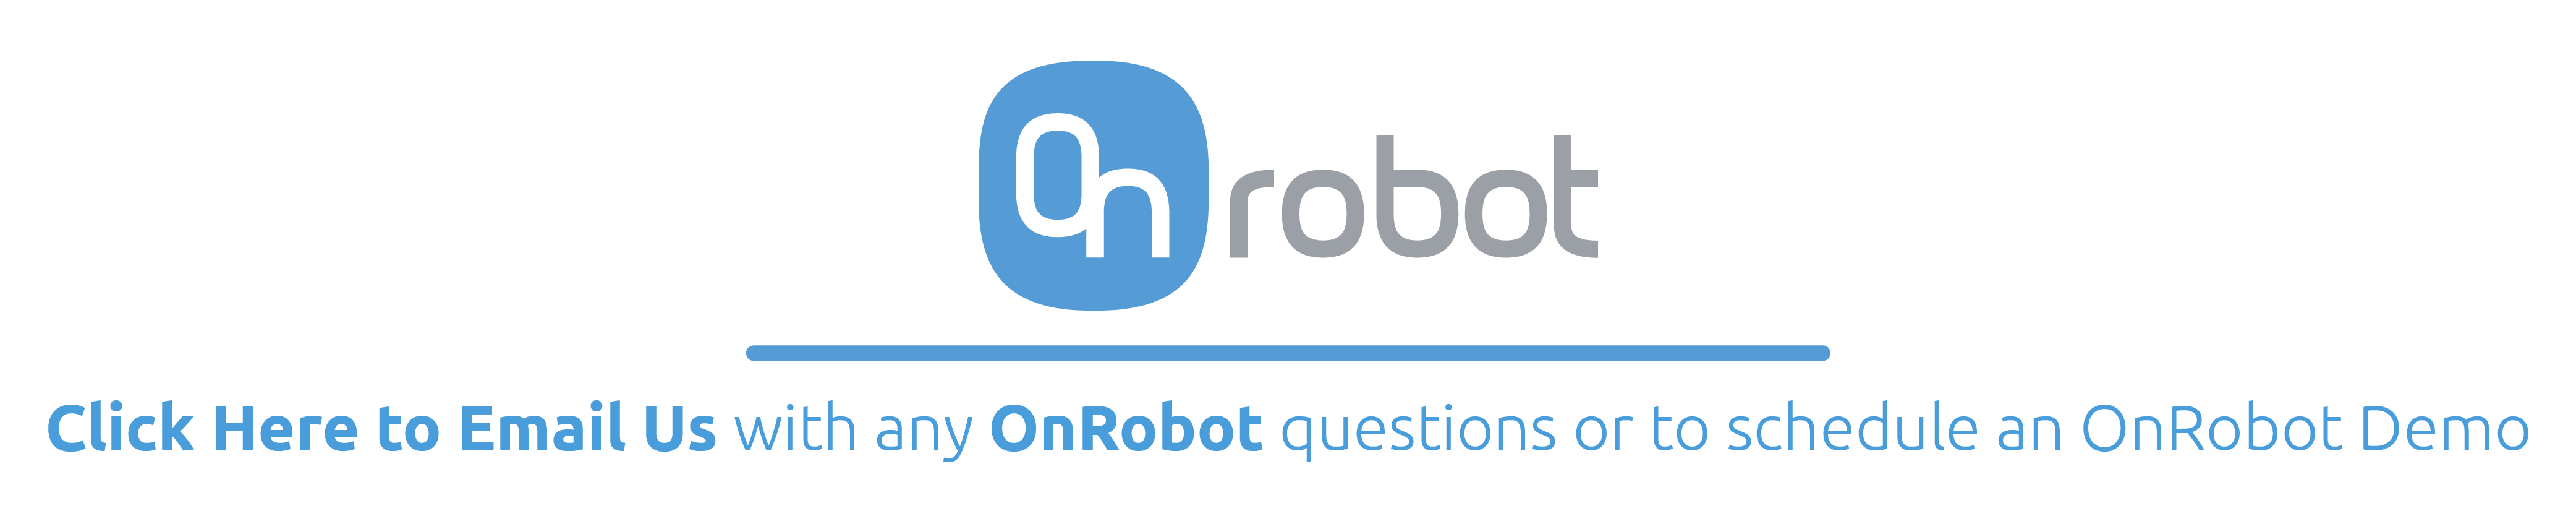 Email Us with questions about OnRobot